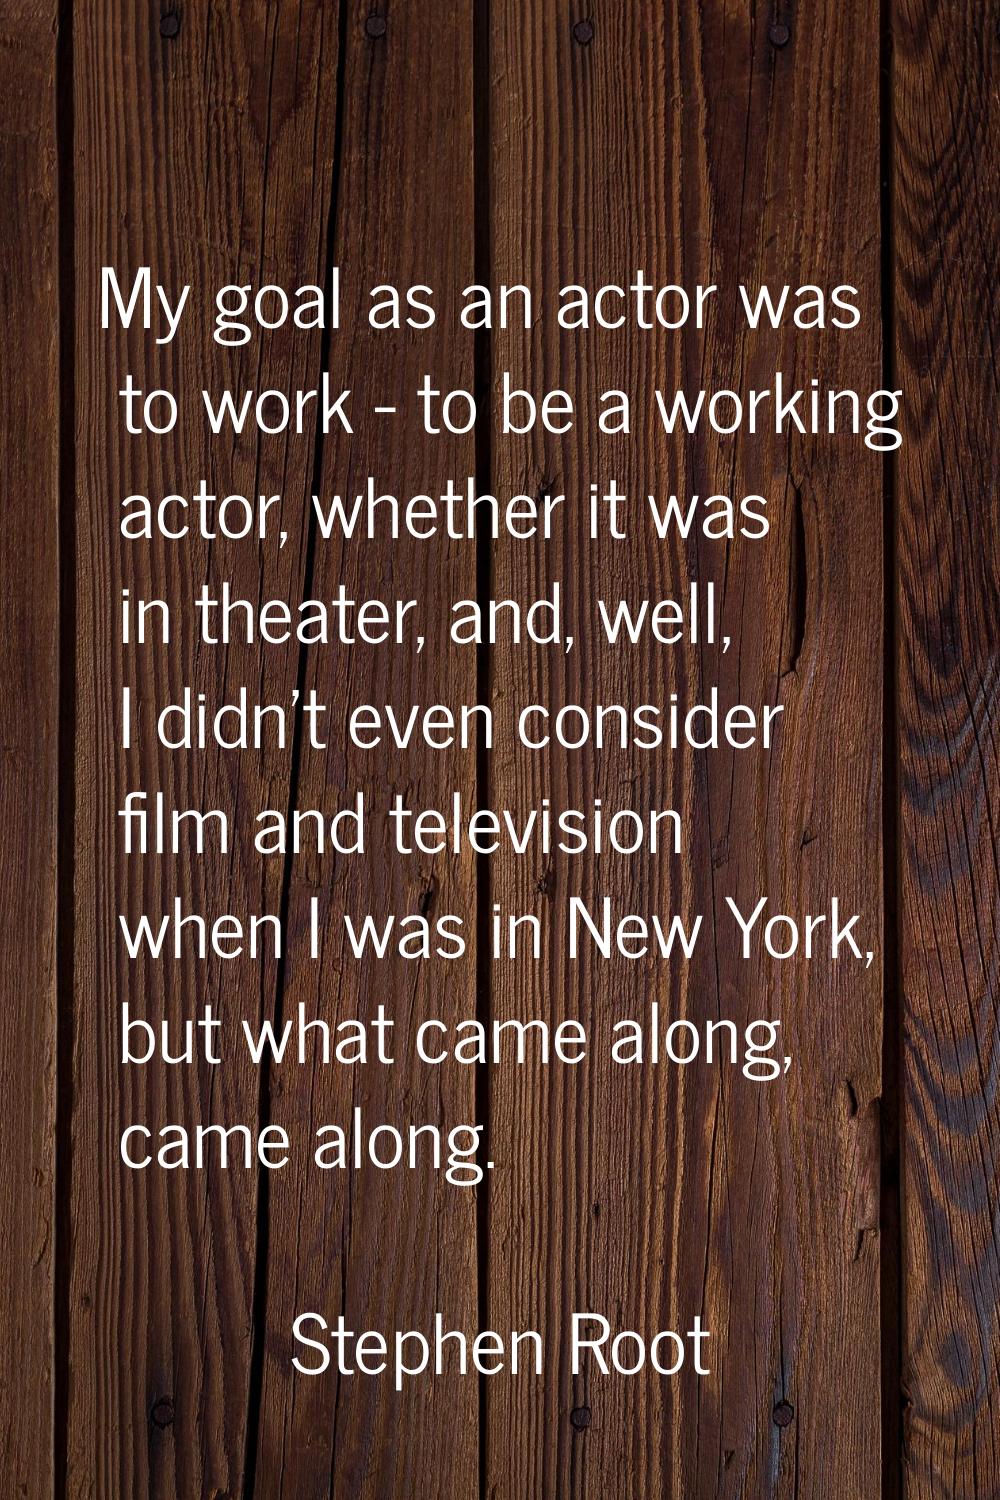 My goal as an actor was to work - to be a working actor, whether it was in theater, and, well, I di